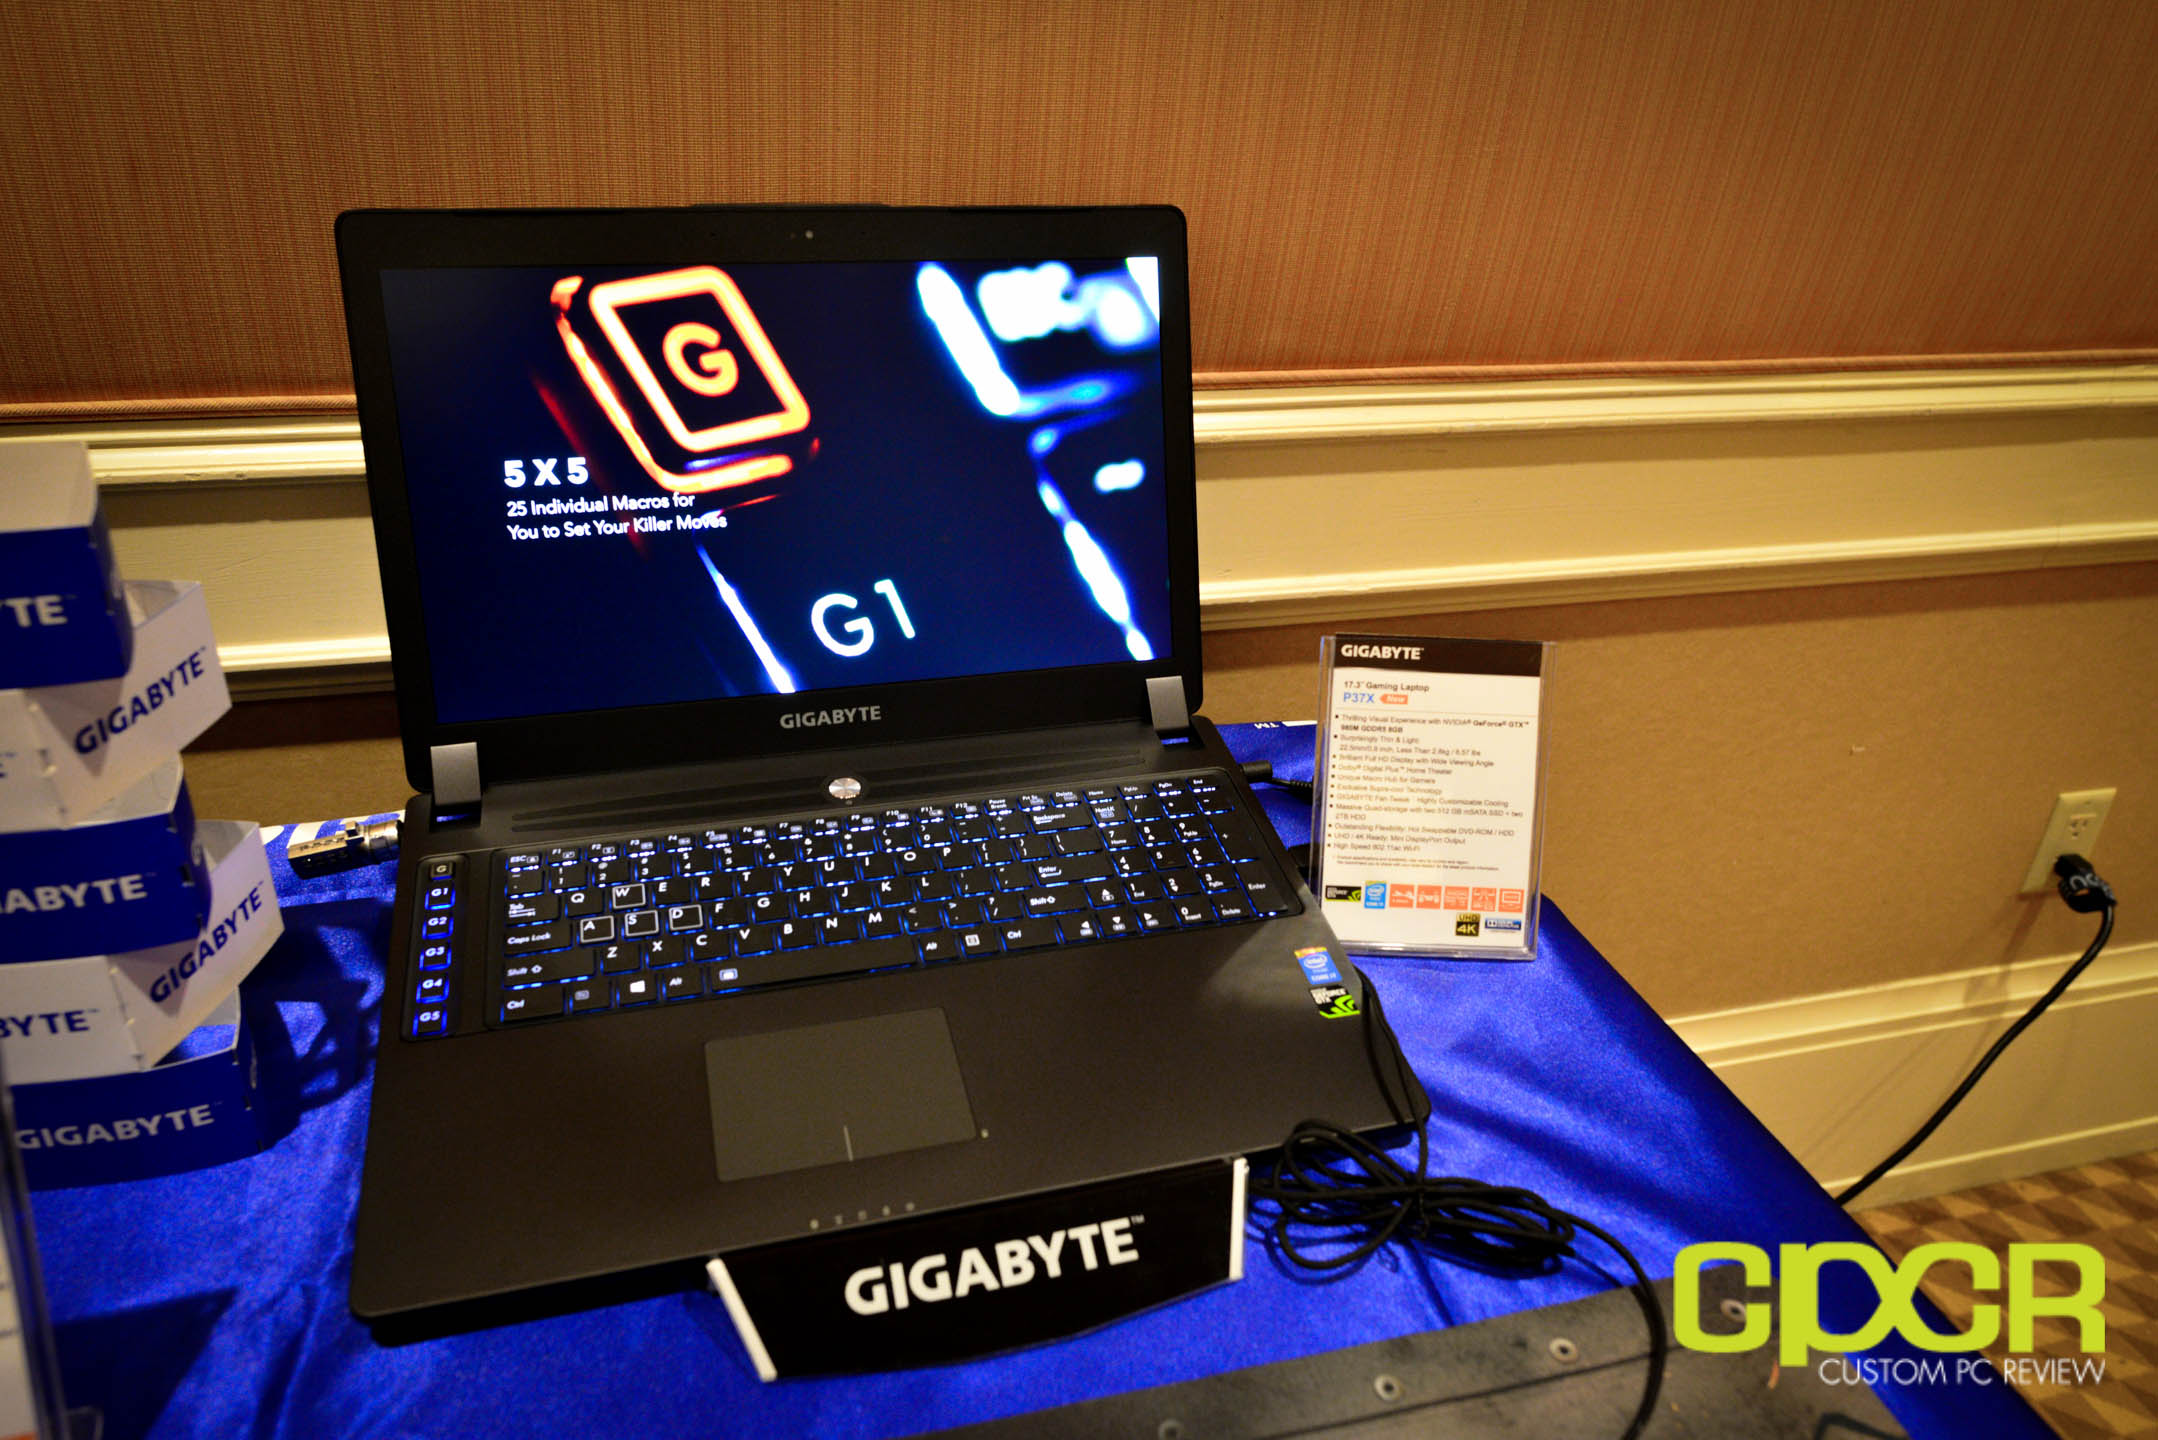 CES 2015: Gigabyte Launches P37X Gaming Laptop